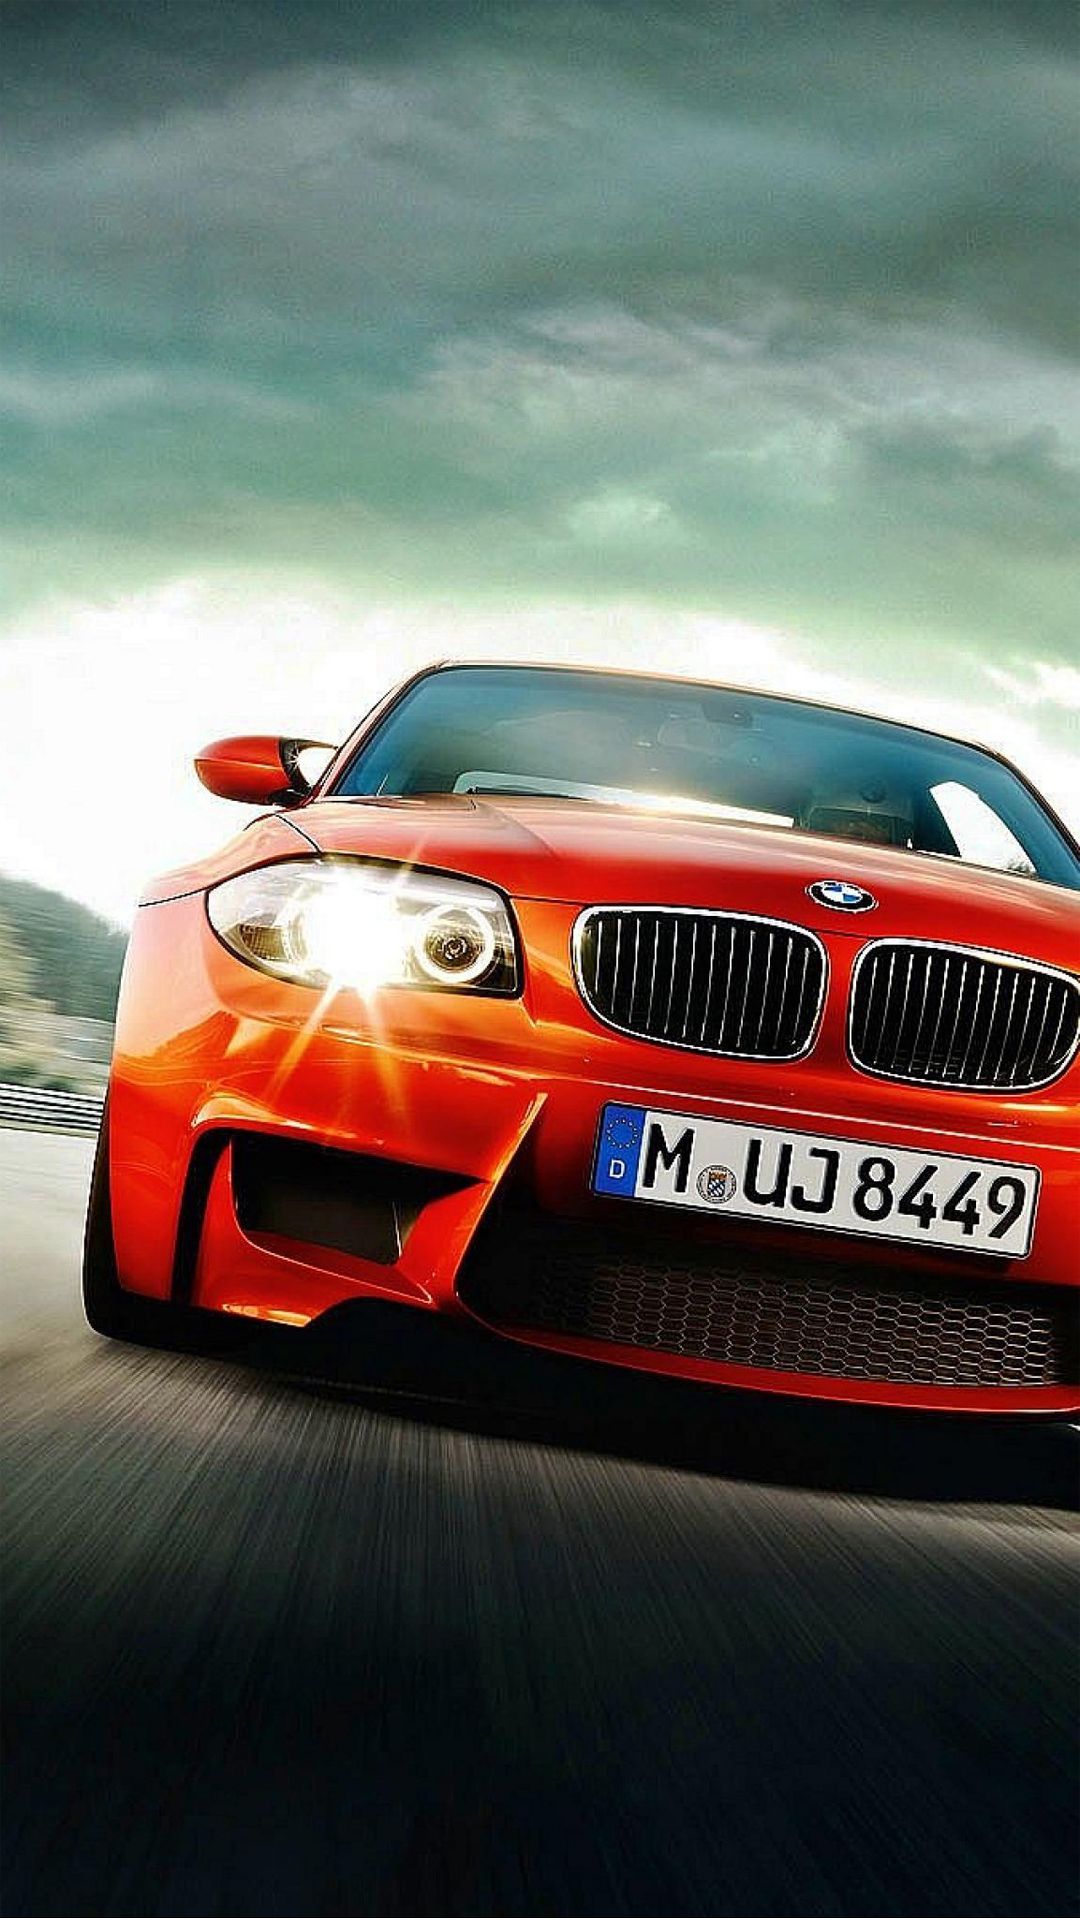 BMW M3 Speed Car Android Wallpaper free download